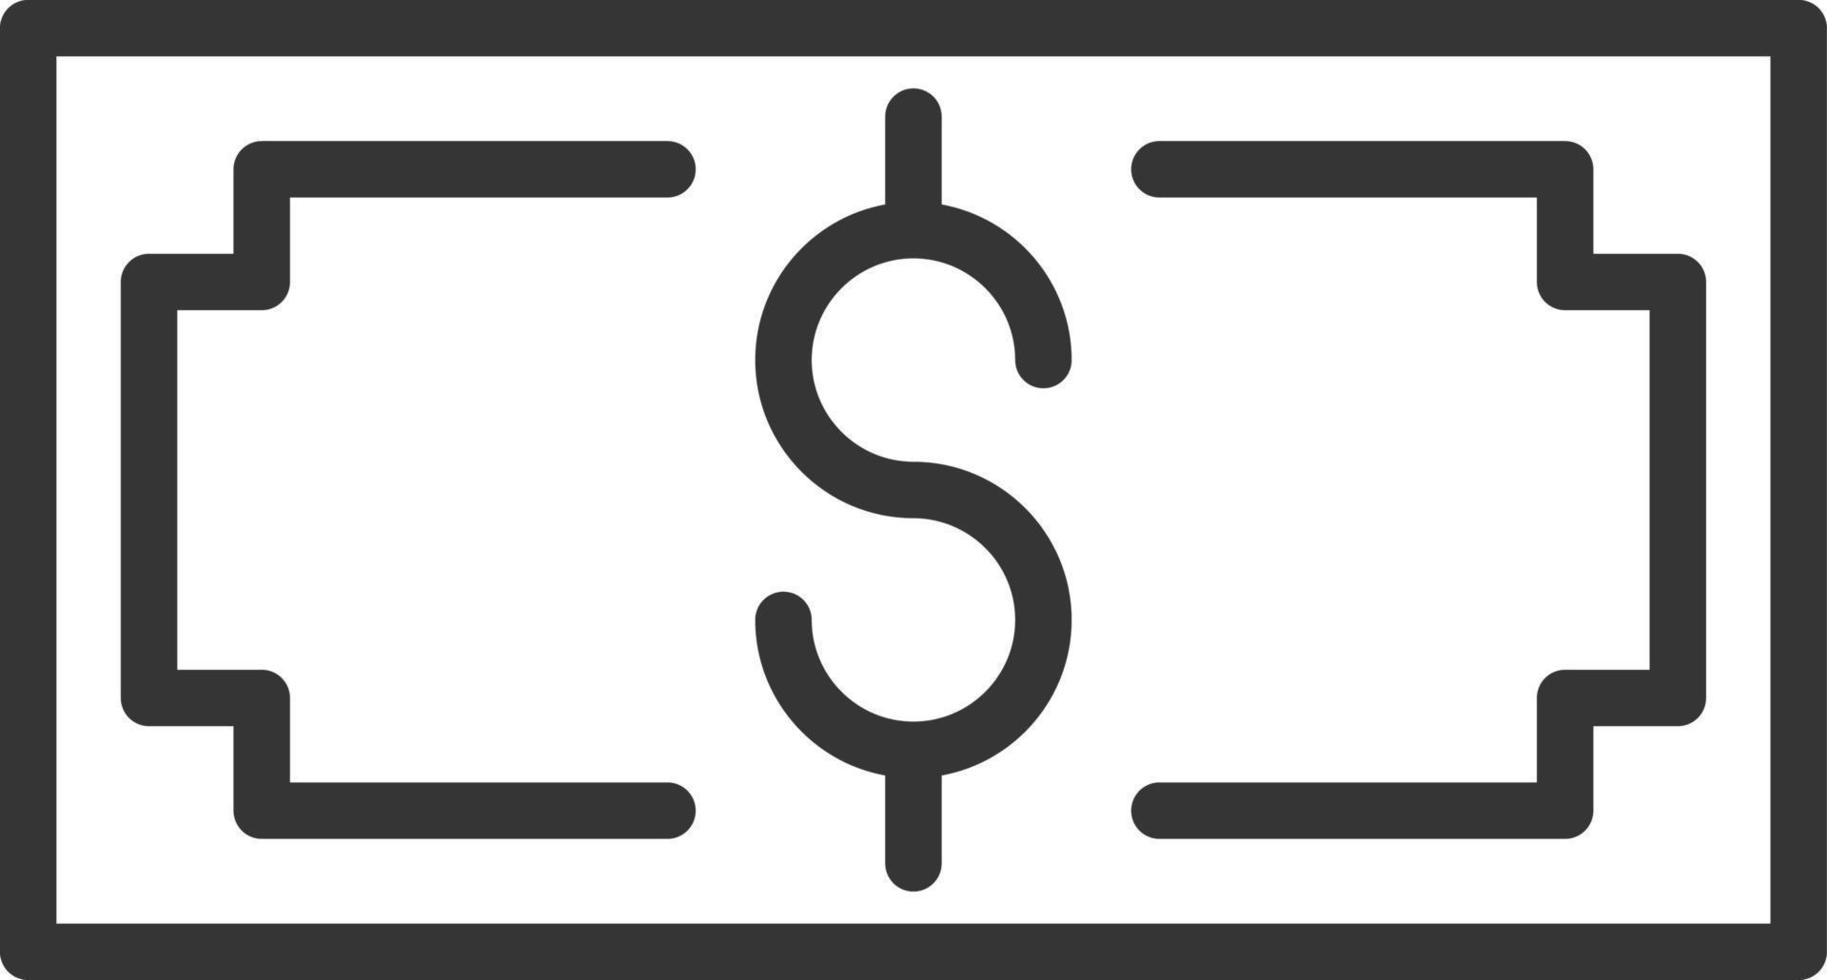 Money note, illustration, vector on a white background.